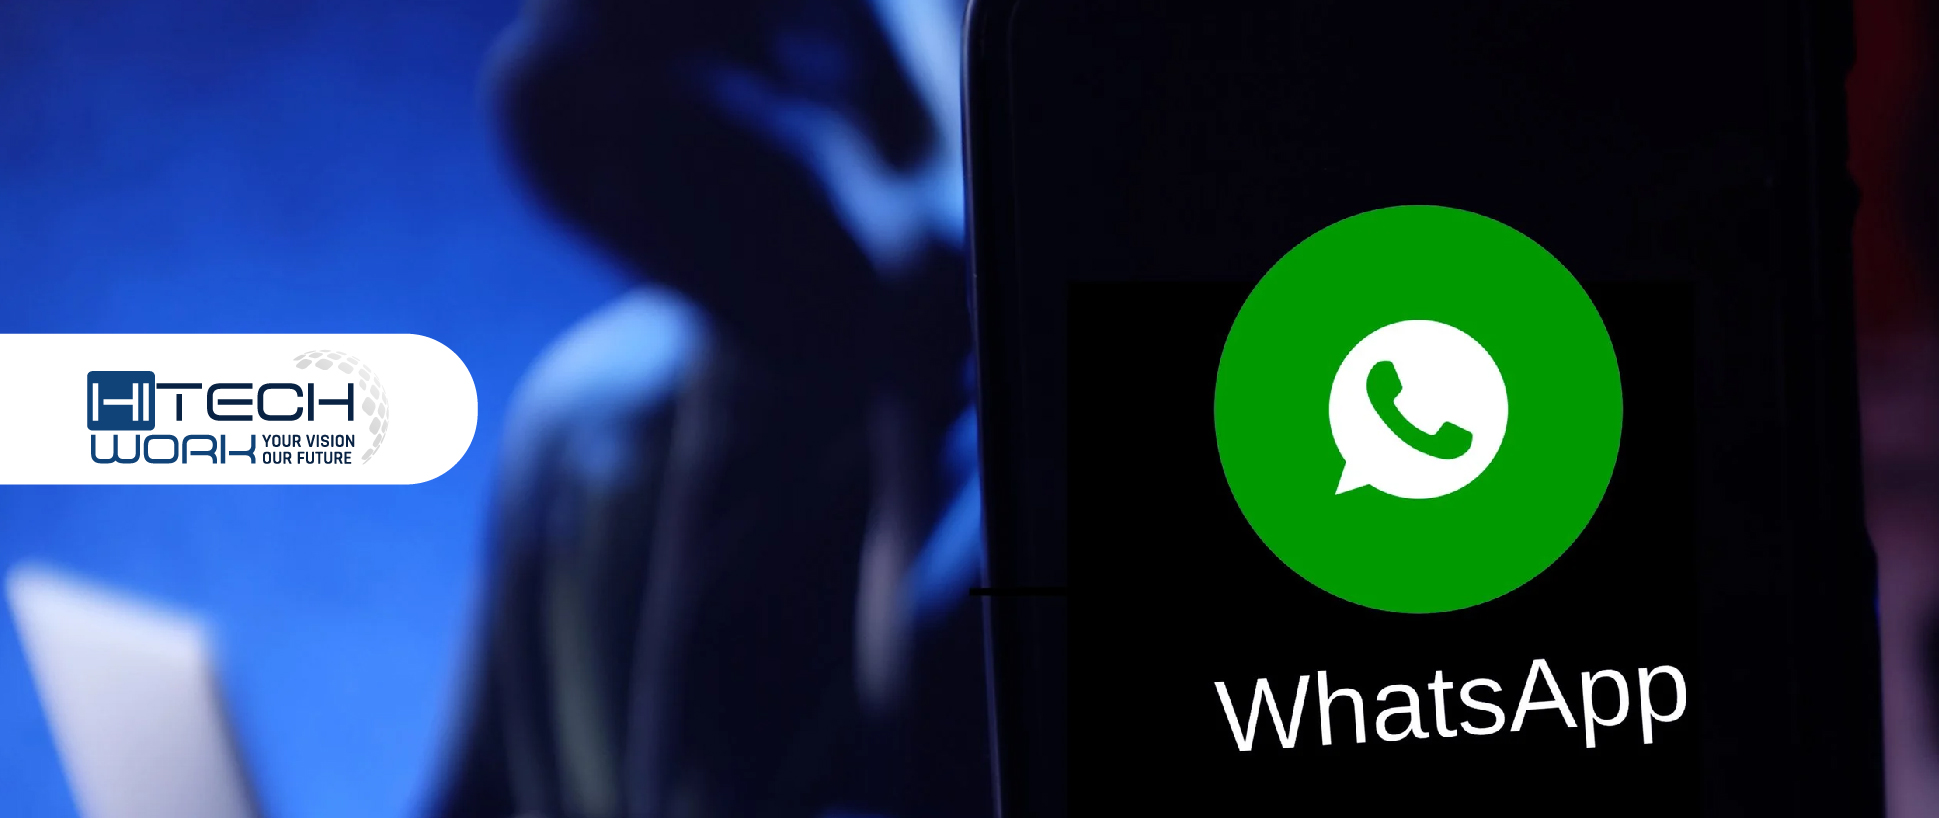 WhatsApp Launches Three New Security Tools To Stop Hackers